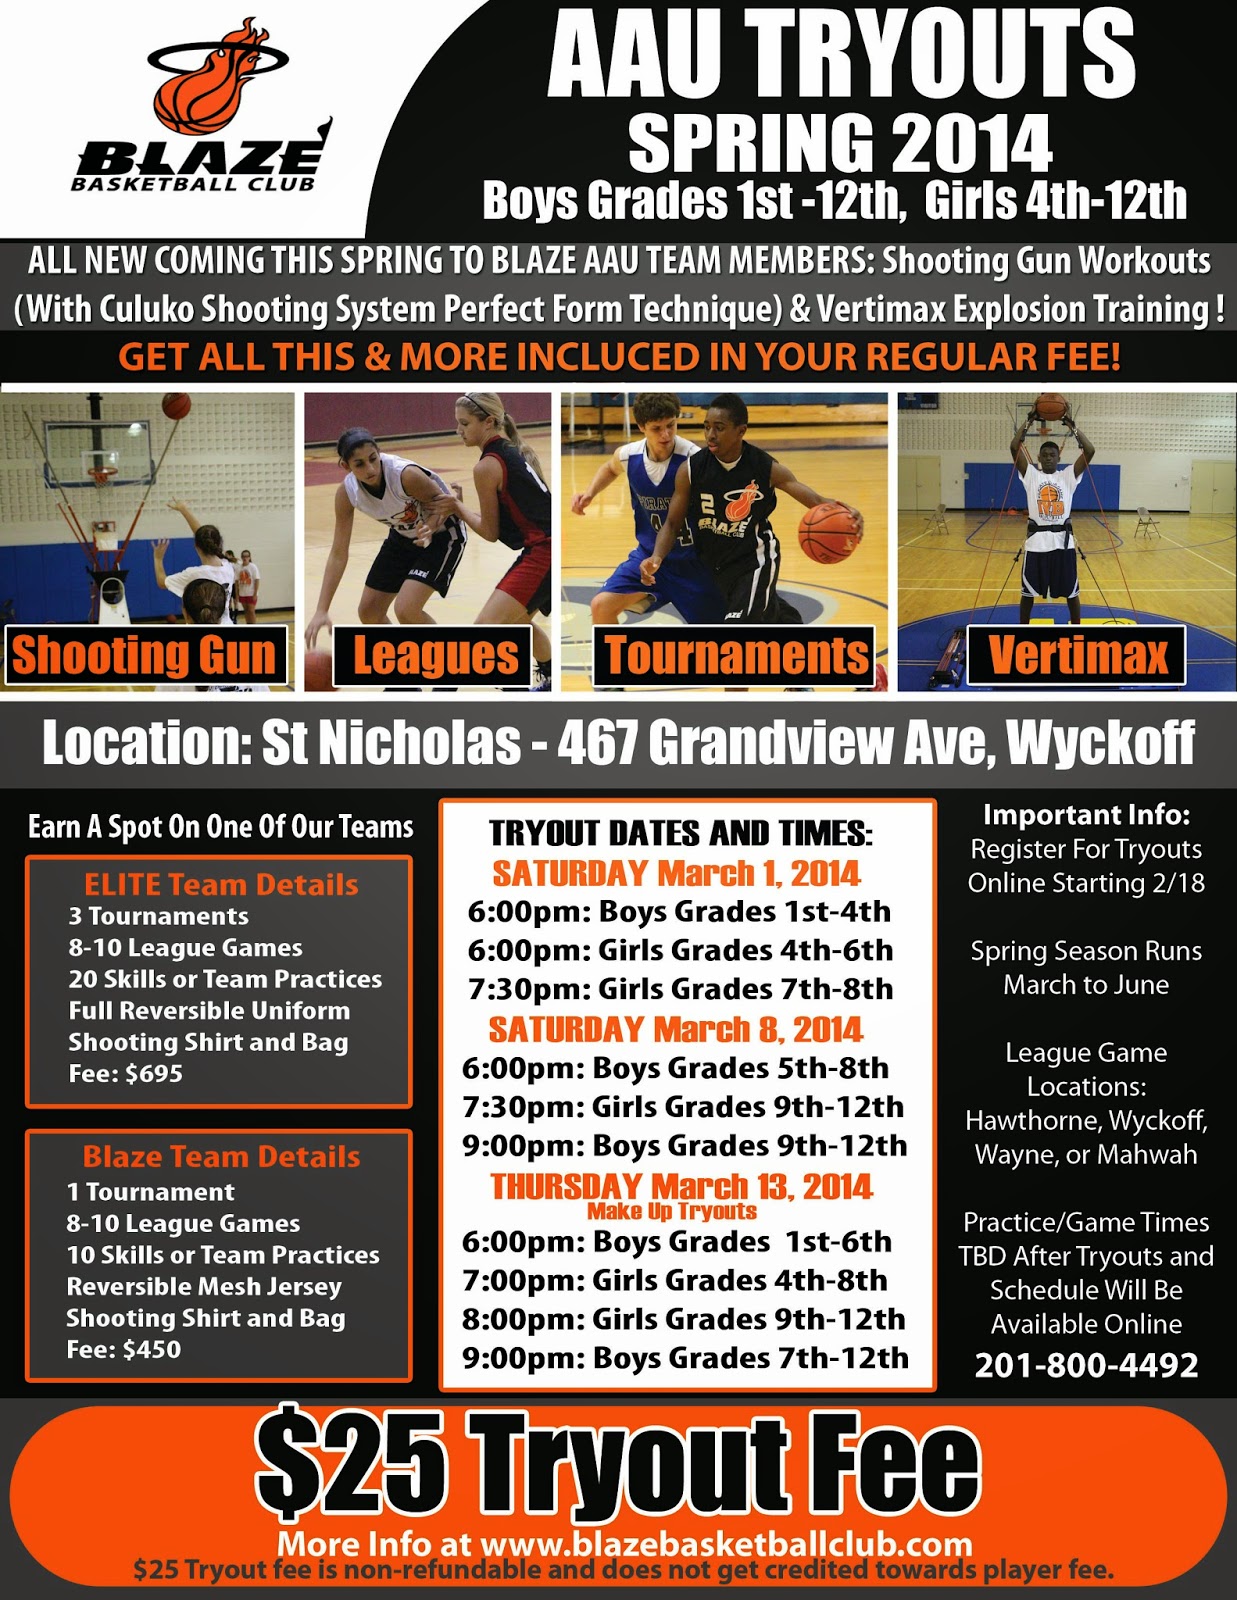 HOME OF THE BLAZE BASKETBALL CLUB SPRING AAU TRYOUTS